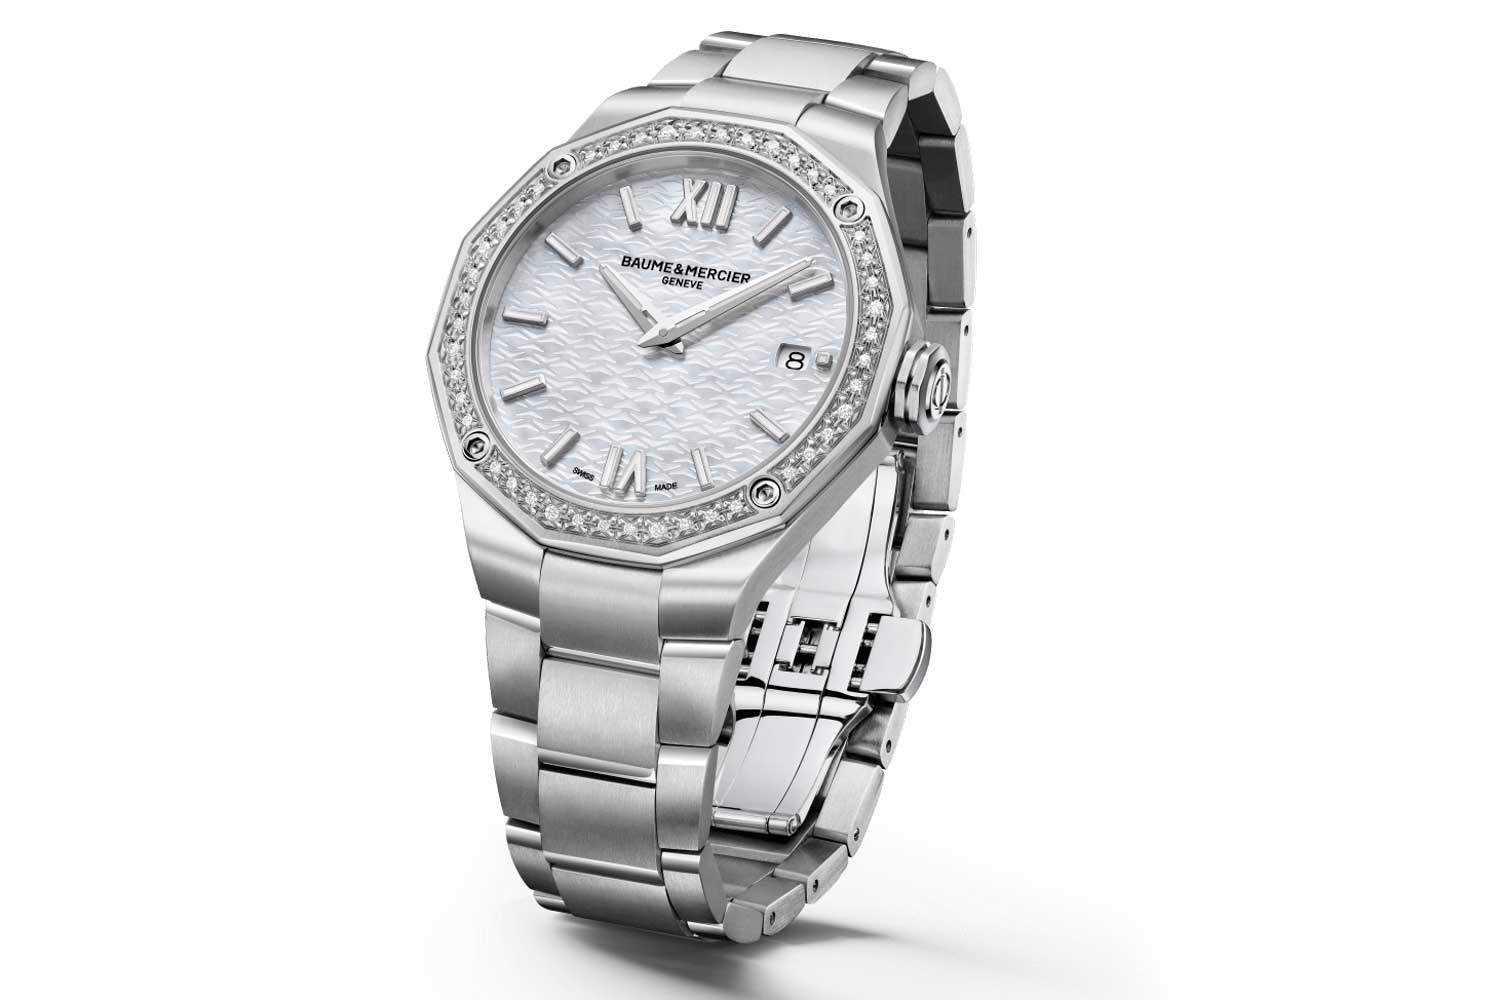 Ref. M0A10662 with mother-of-pearl dial, diamond-set bezel and quartz movement